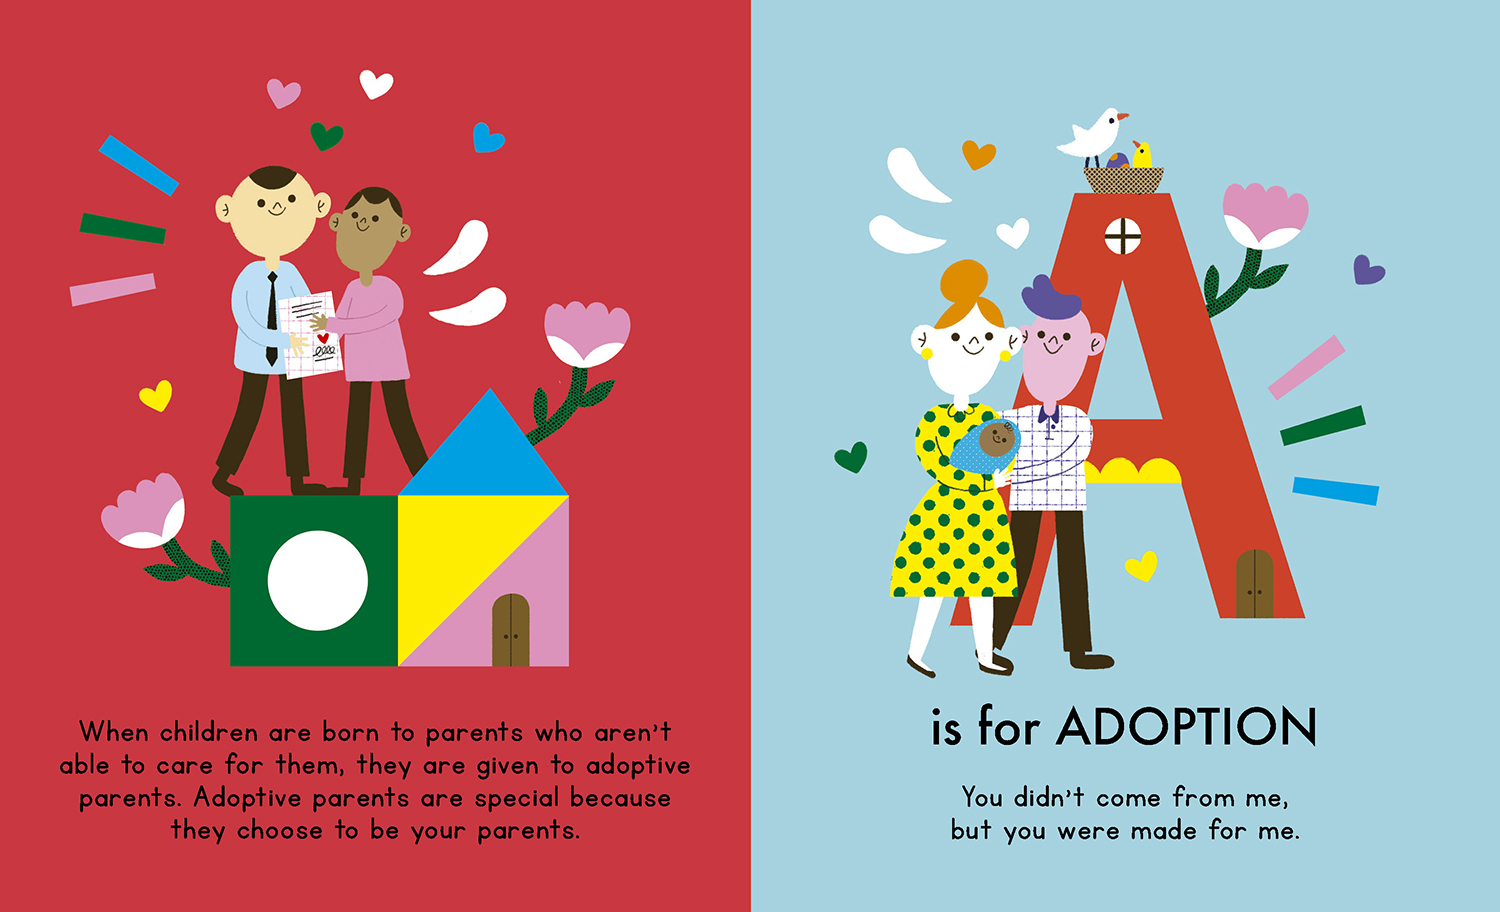 An ABC of Families